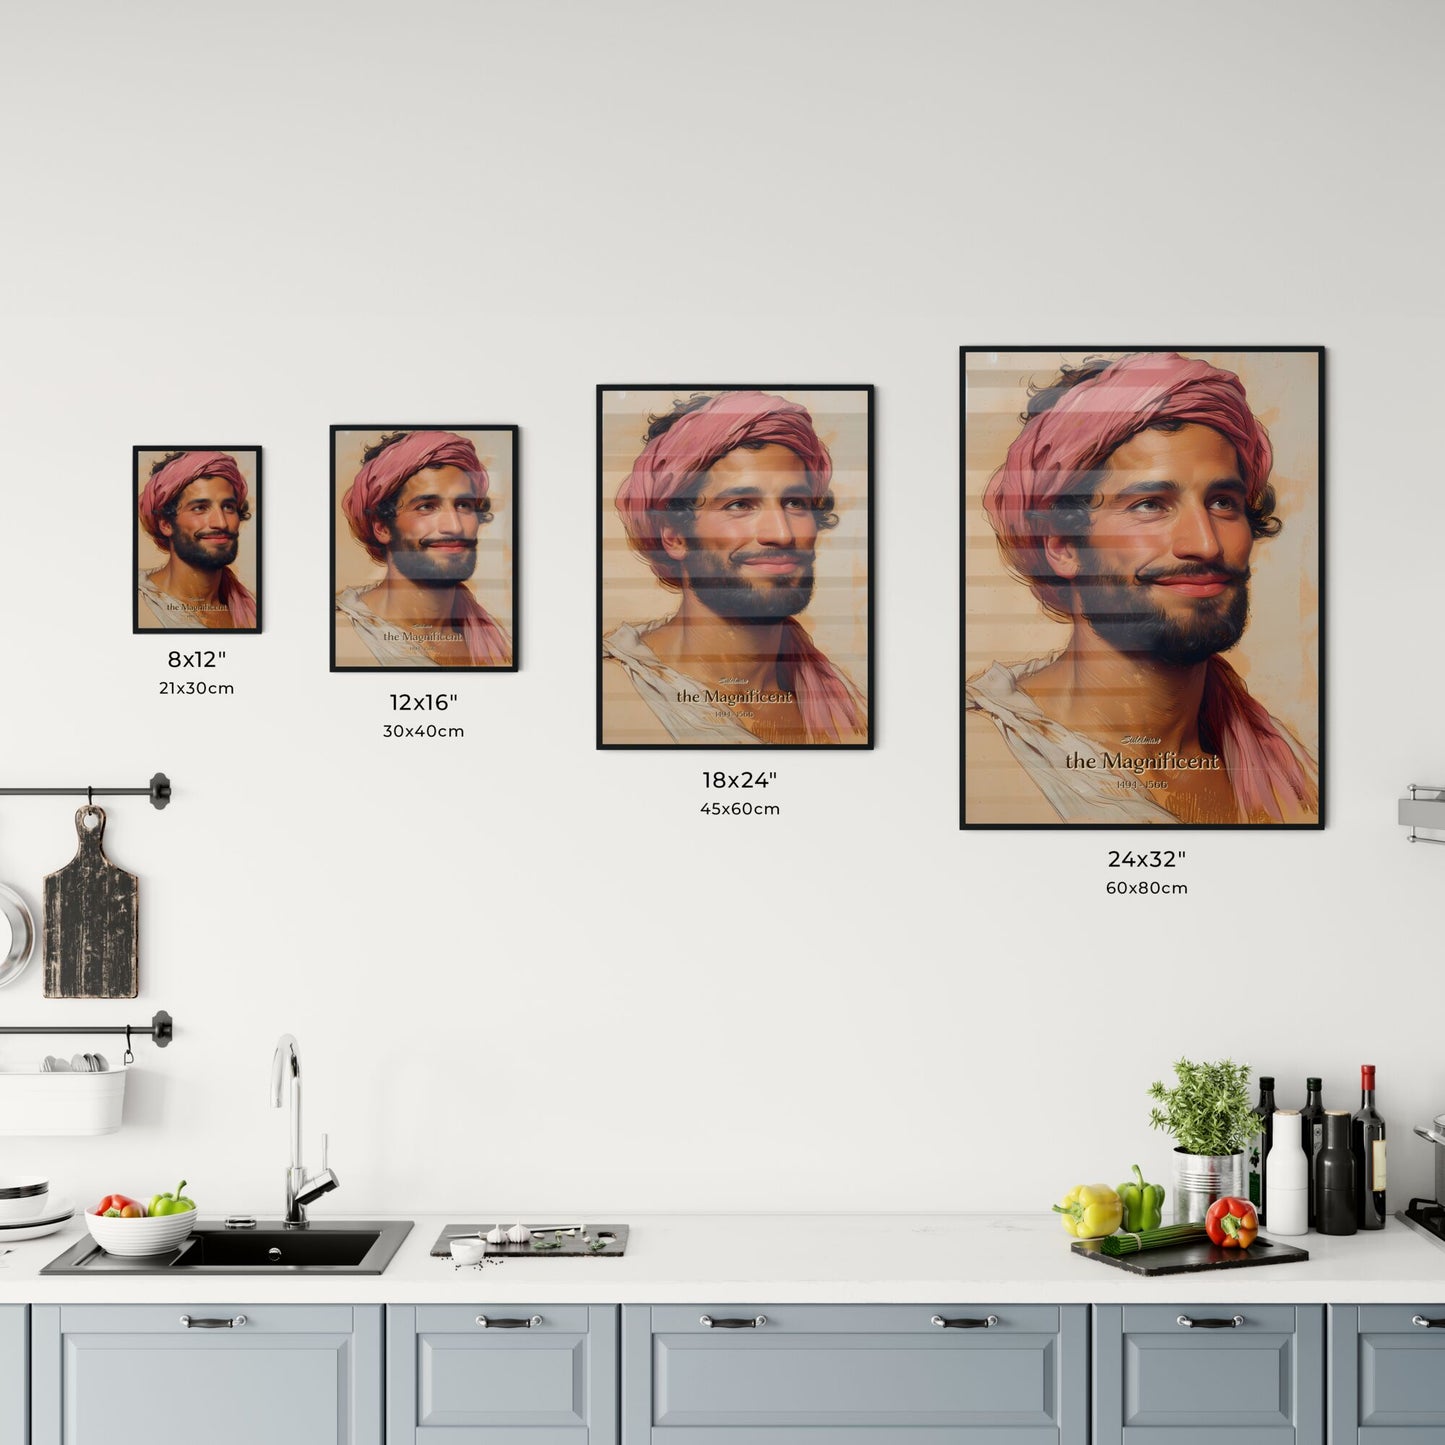 Suleiman, the Magnificent, 1494 - 1566, A Poster of a man with a beard and a pink head wrap Default Title